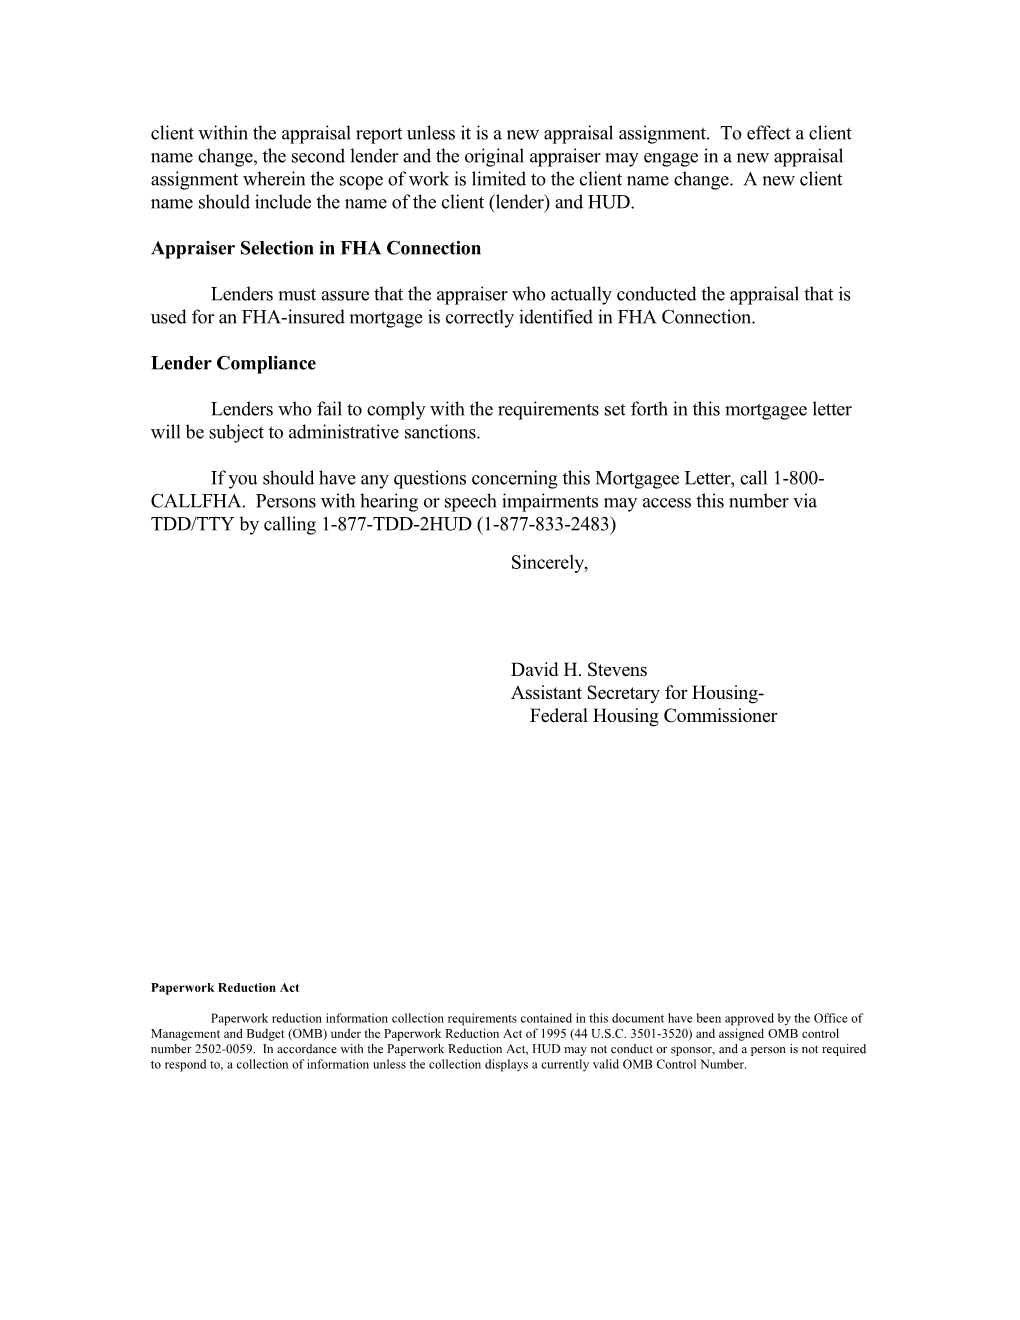 Mortgagee Letter 2009-29